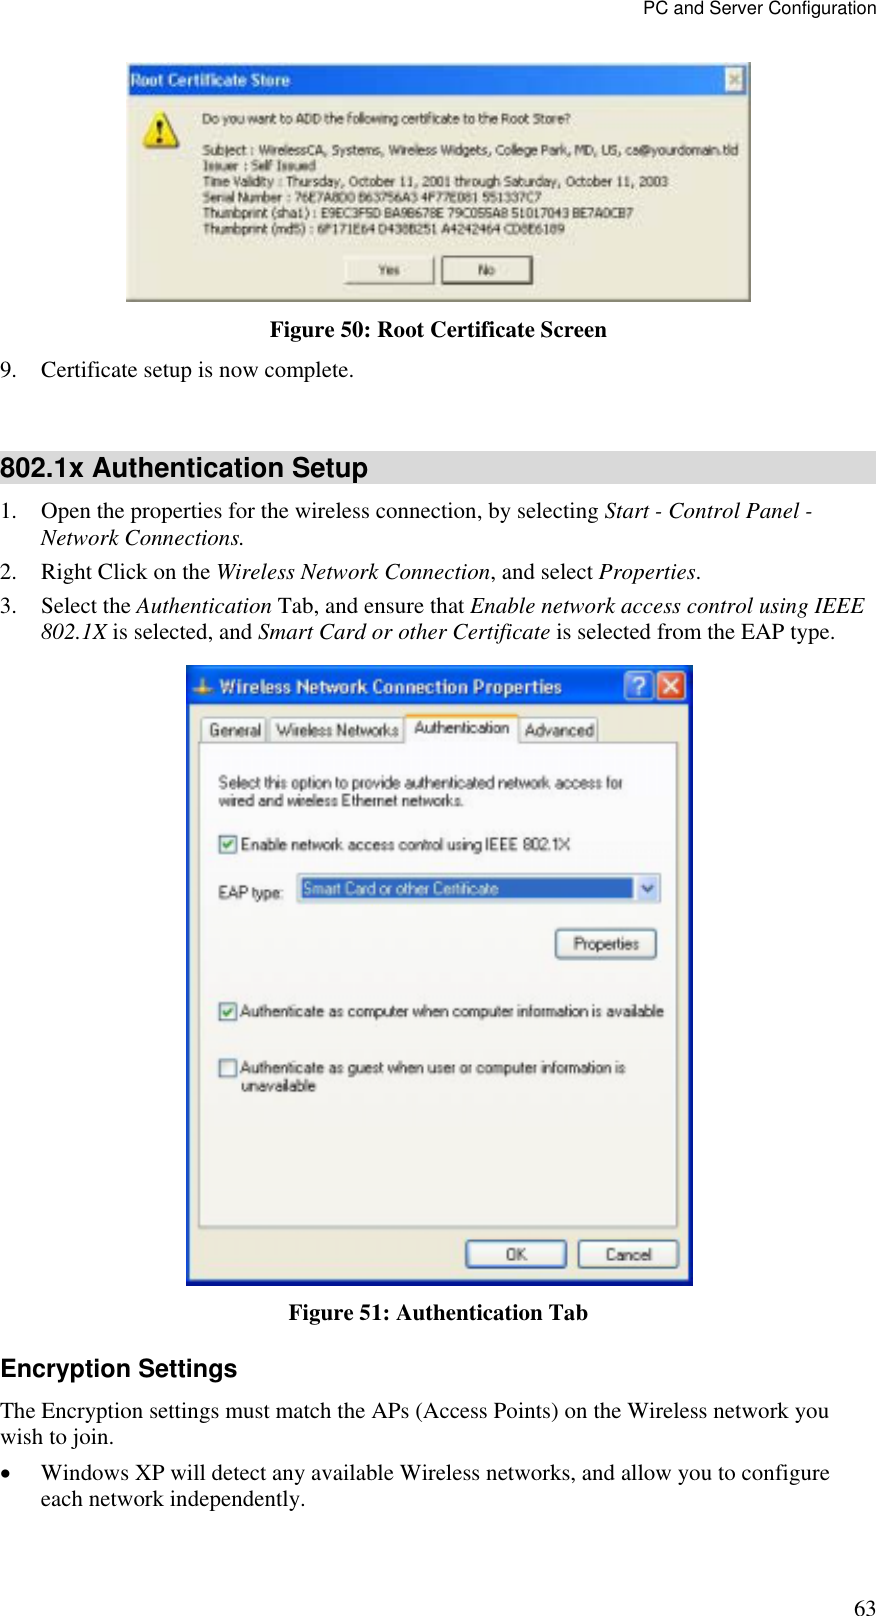 PC and Server Configuration 63  Figure 50: Root Certificate Screen 9.  Certificate setup is now complete.  802.1x Authentication Setup 1.  Open the properties for the wireless connection, by selecting Start - Control Panel - Network Connections. 2.  Right Click on the Wireless Network Connection, and select Properties.  3. Select the Authentication Tab, and ensure that Enable network access control using IEEE 802.1X is selected, and Smart Card or other Certificate is selected from the EAP type.   Figure 51: Authentication Tab Encryption Settings The Encryption settings must match the APs (Access Points) on the Wireless network you wish to join. •  Windows XP will detect any available Wireless networks, and allow you to configure each network independently. 